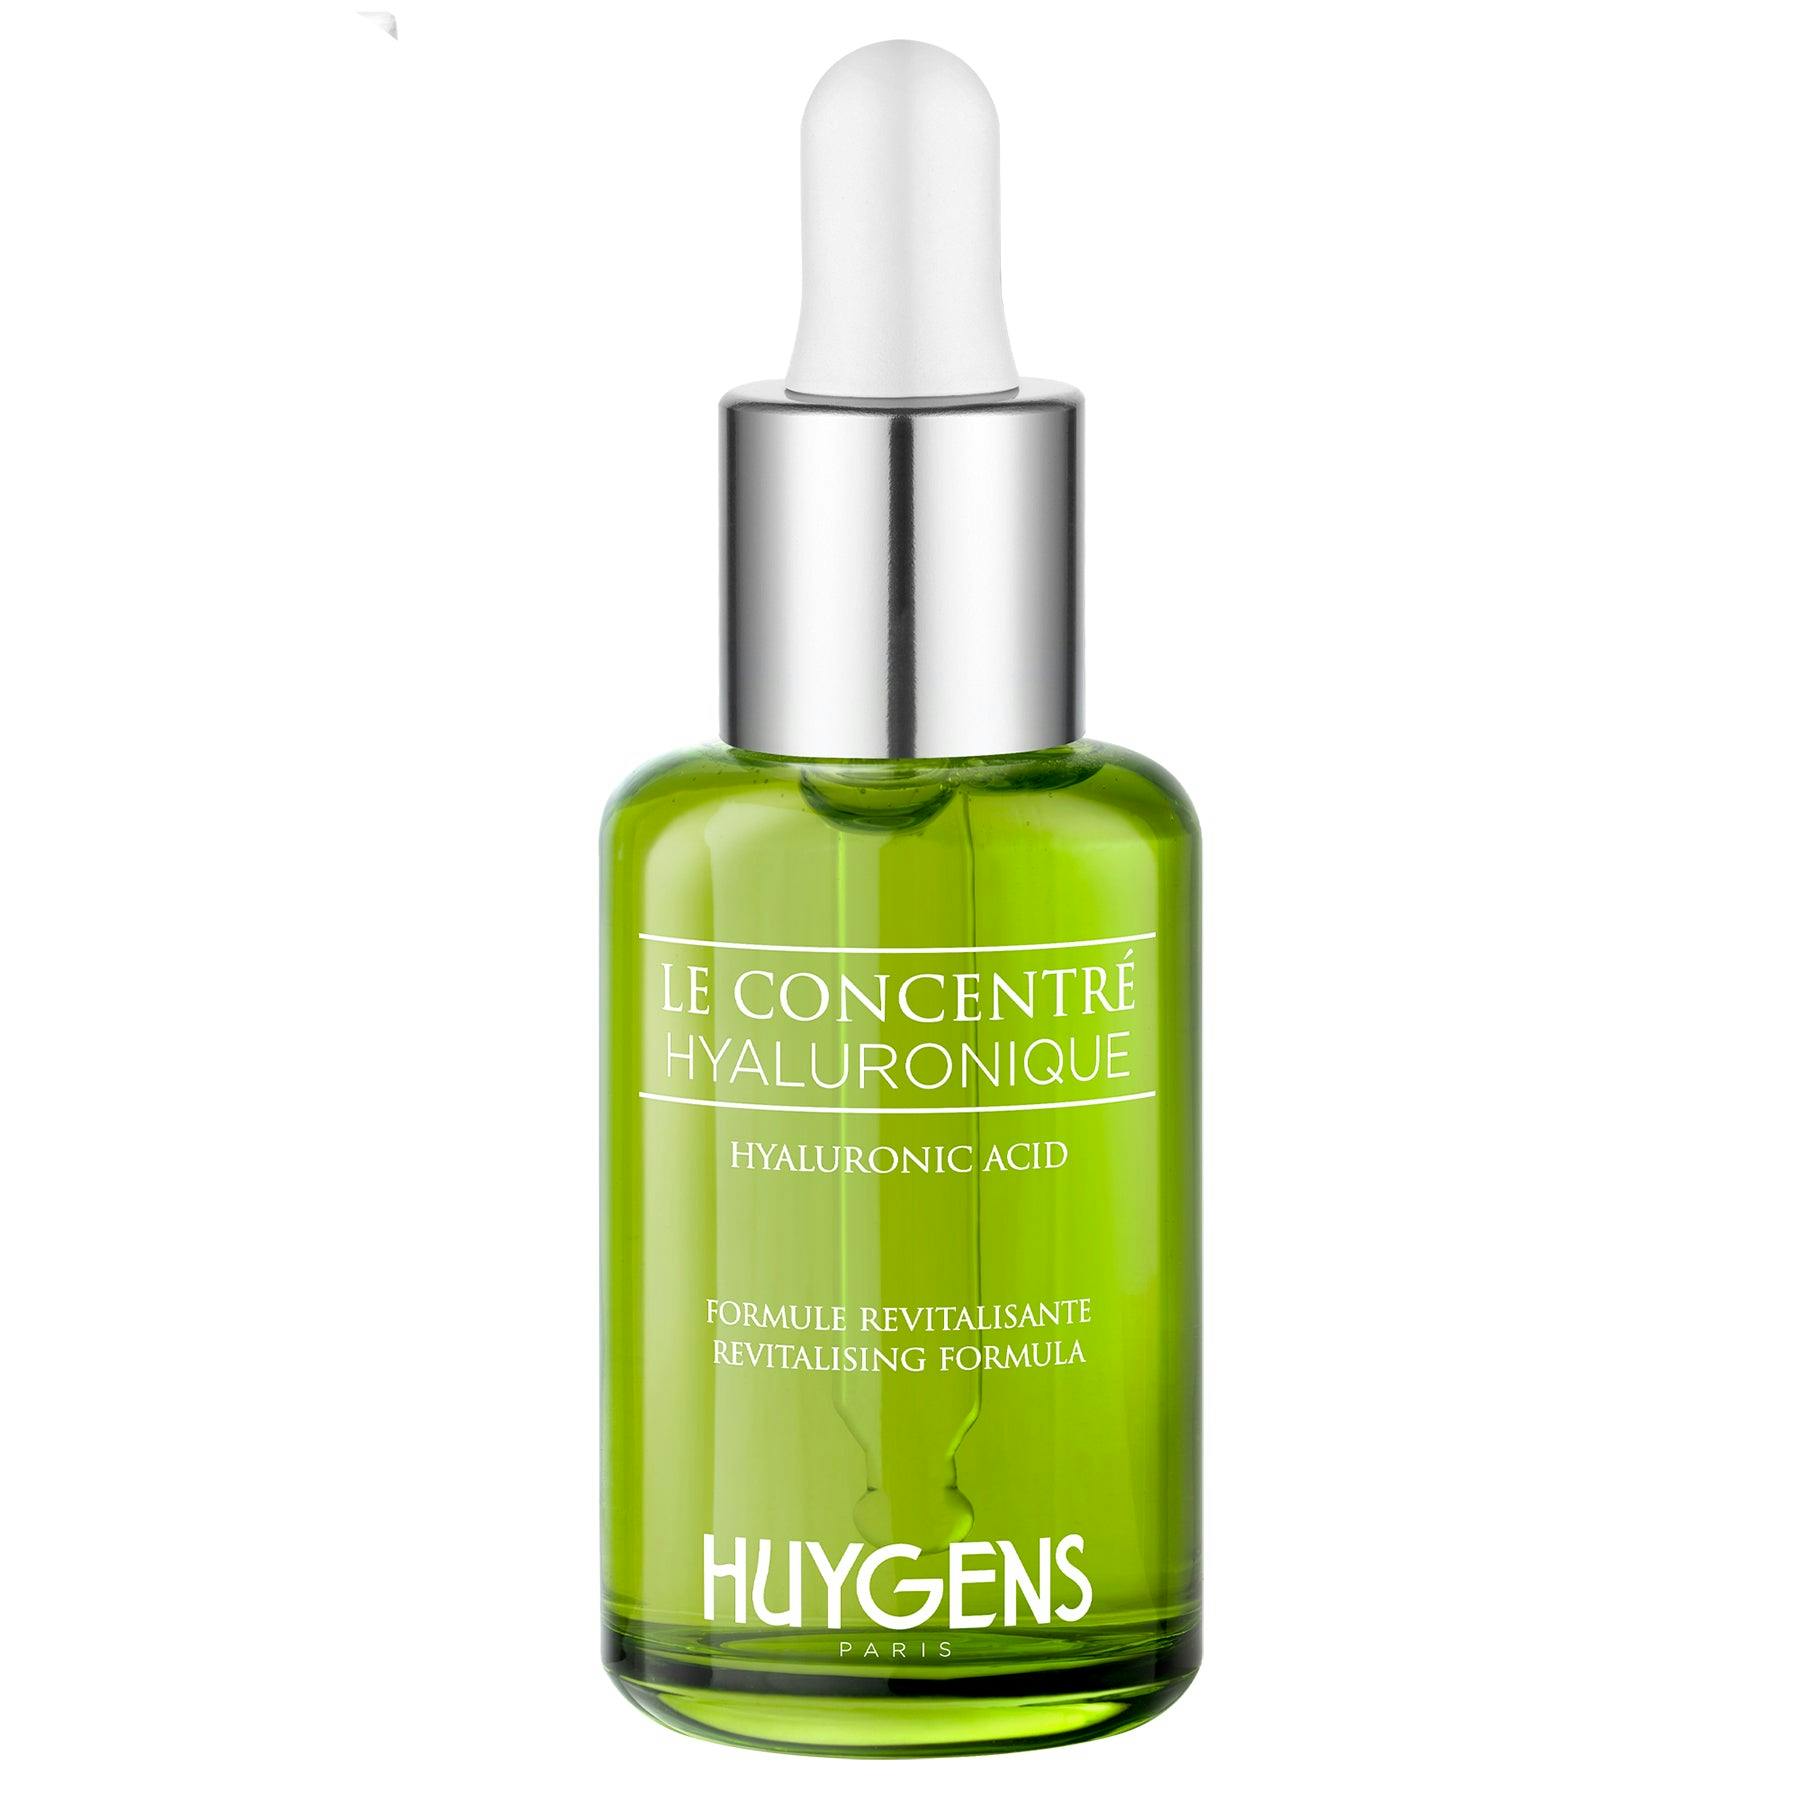 Huygens Hyaluronic Acid Concentrate